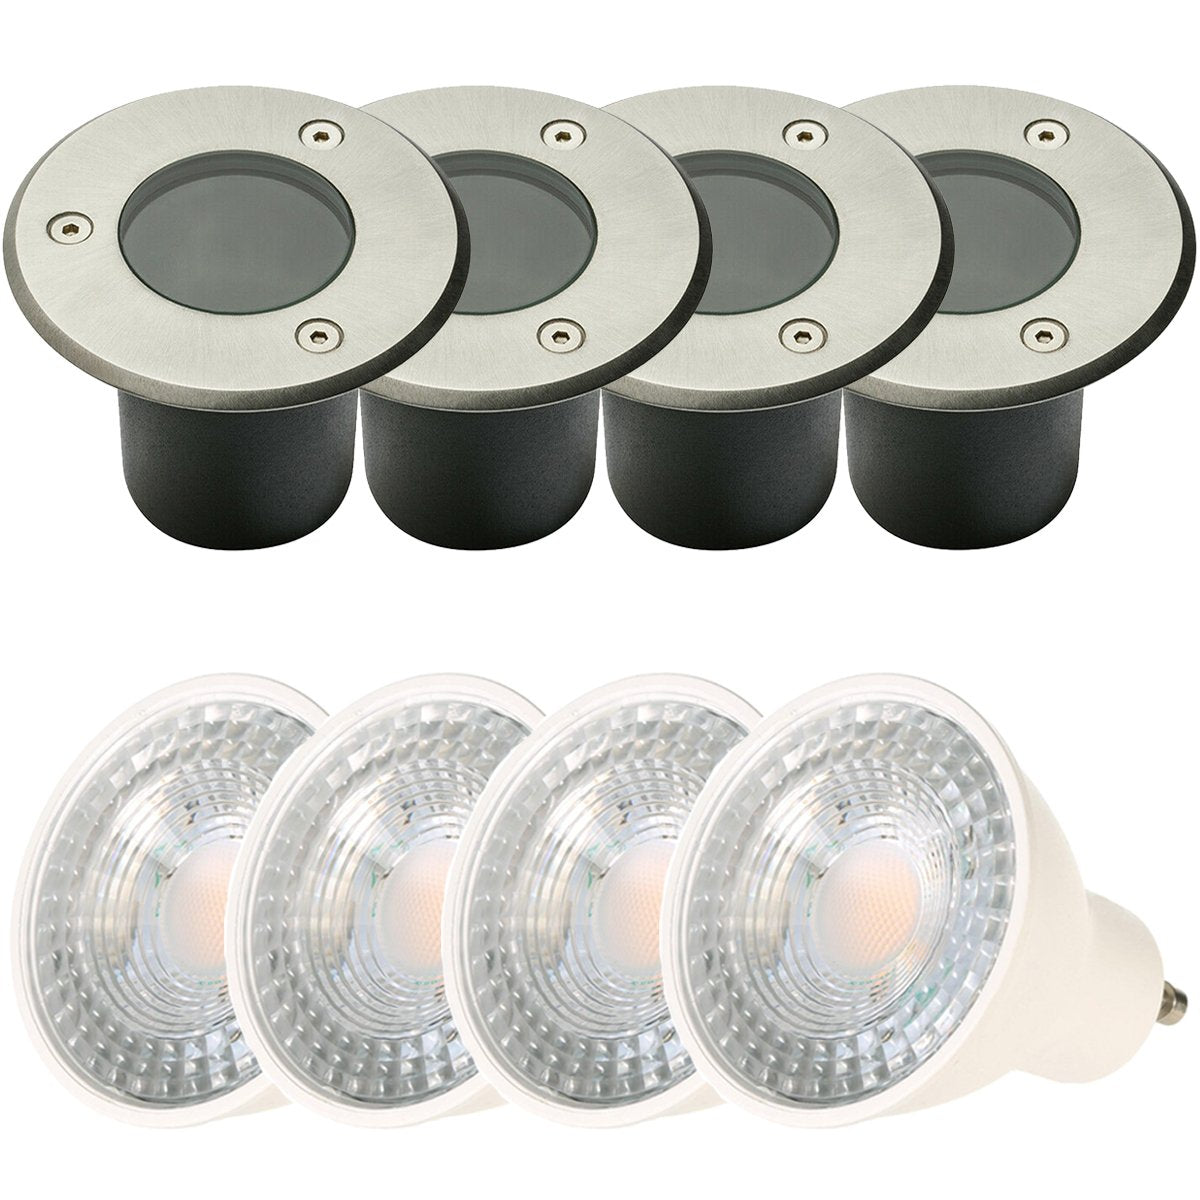 CGC NOLA Four Round Small With Bulbs Stainless Steel Inground Or Decking Lights